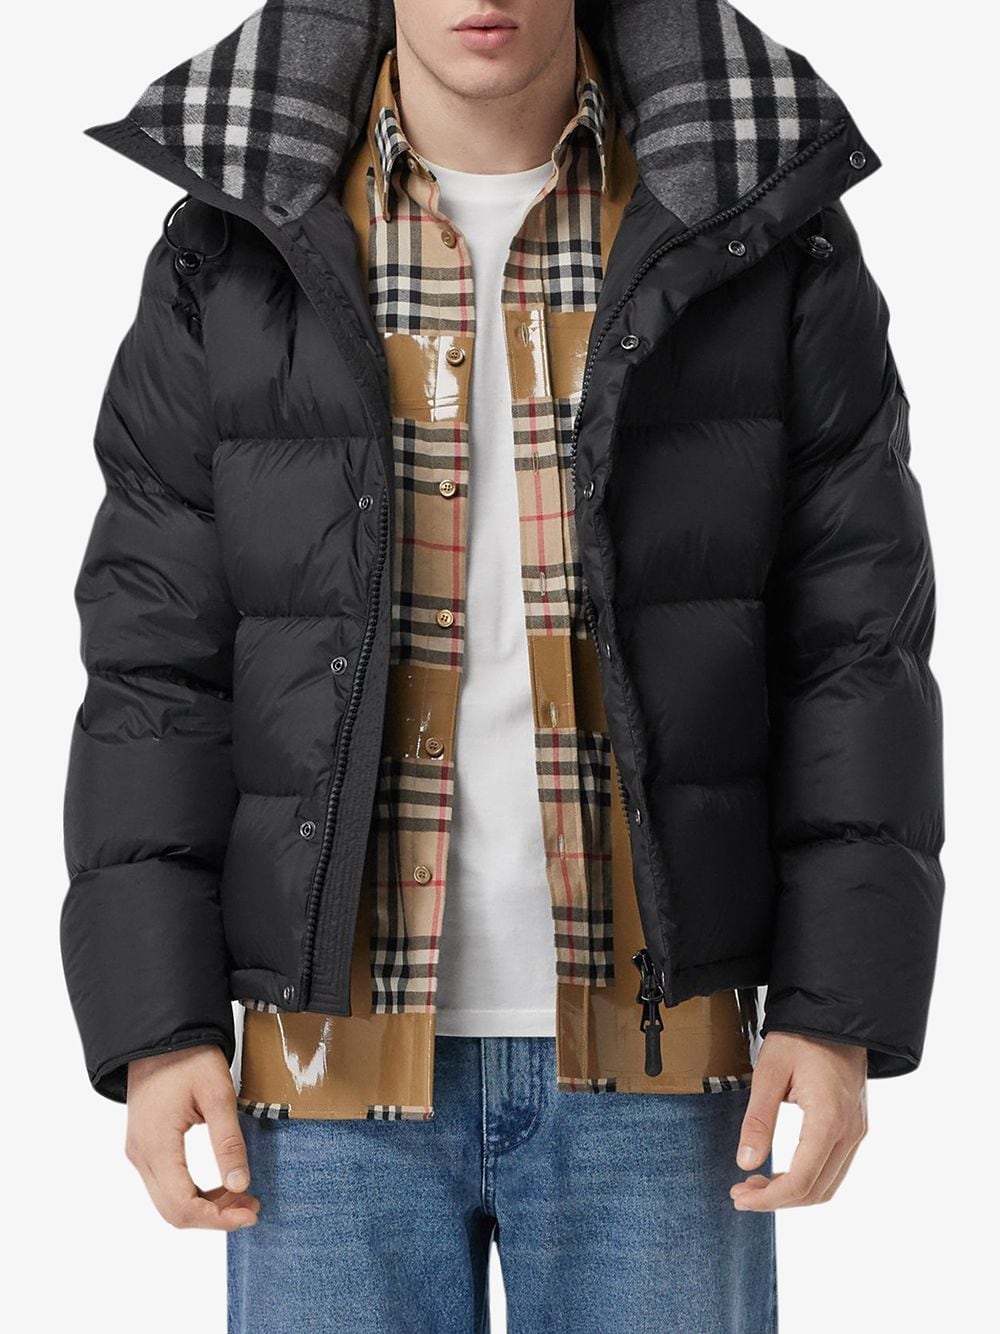 Burberry Removable Sleeve Padded Jacket - Farfetch